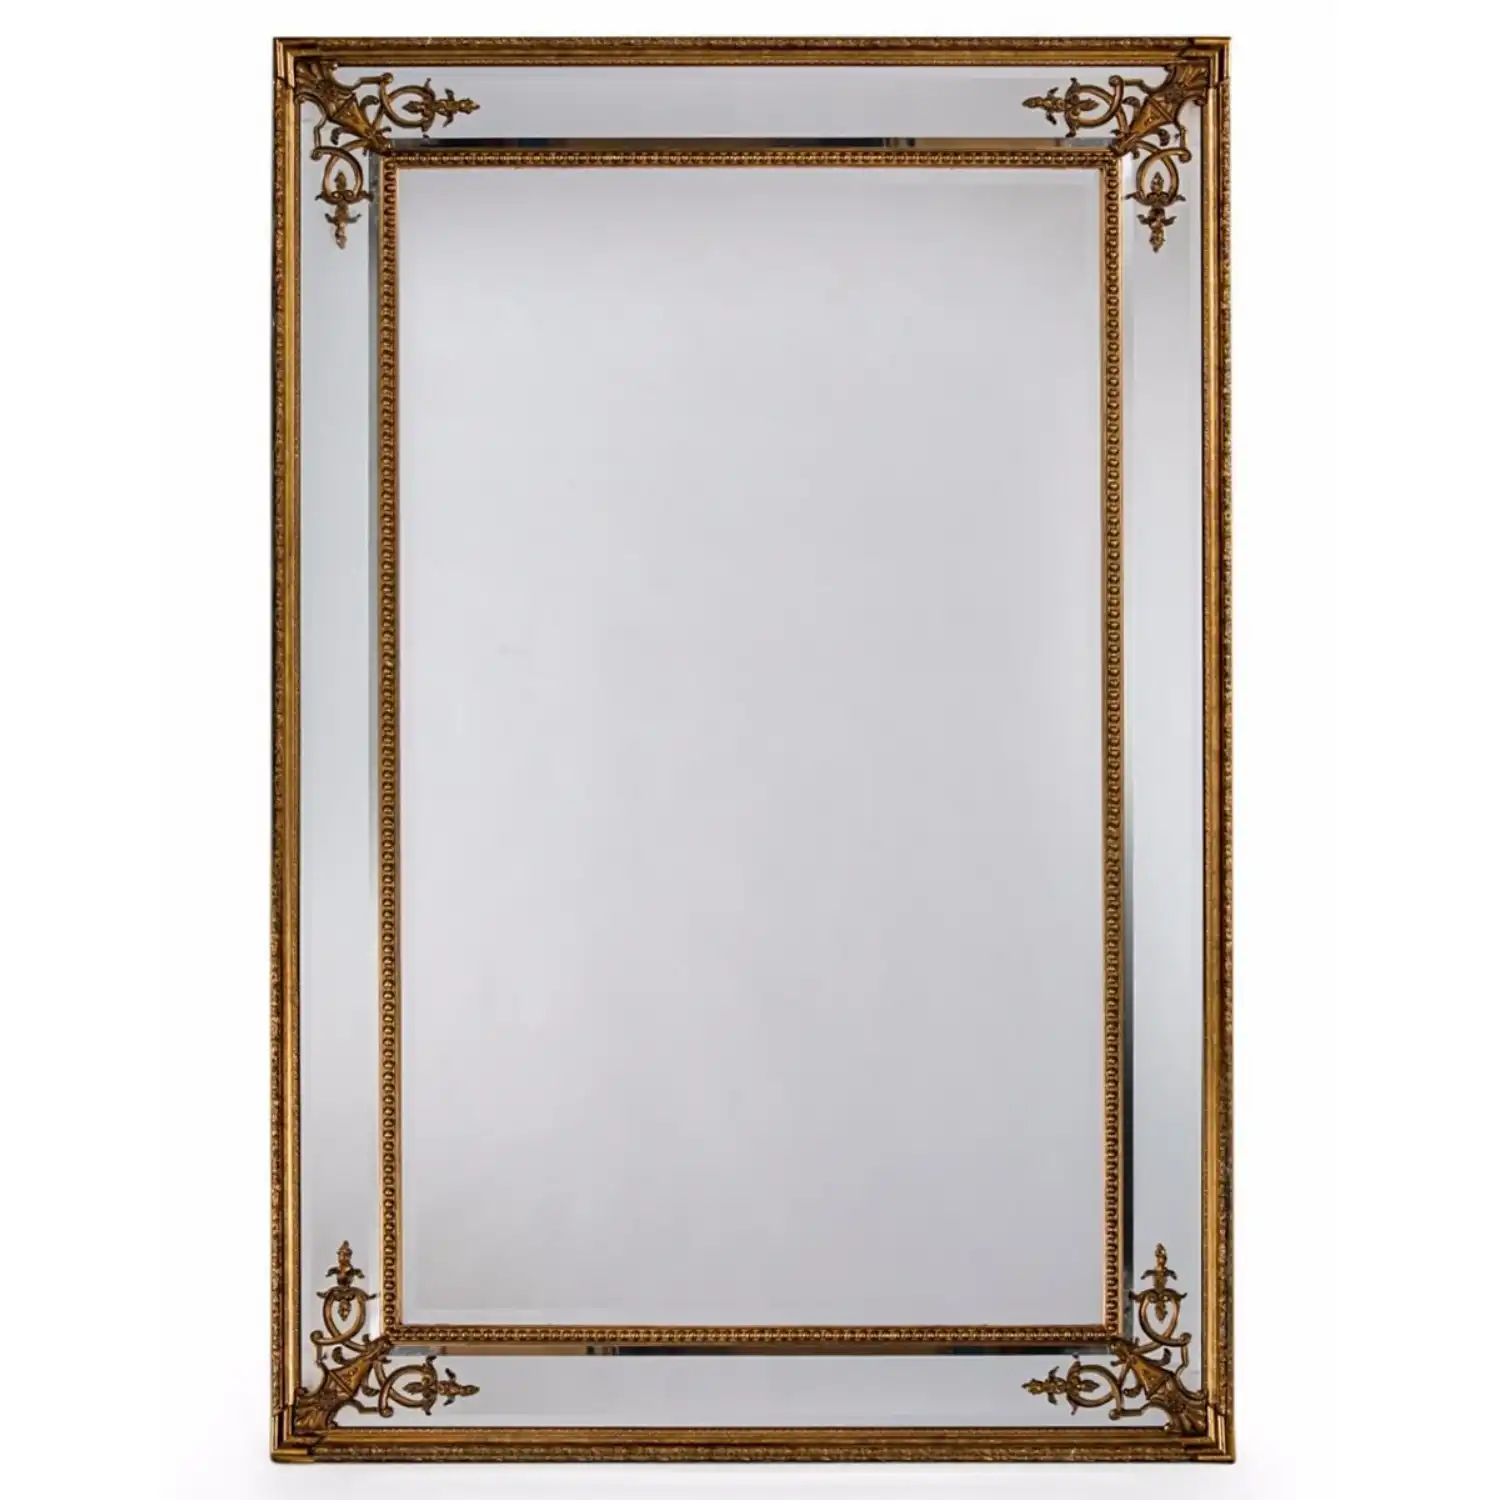 Gold Ornate Rectangular French Wall Mirror